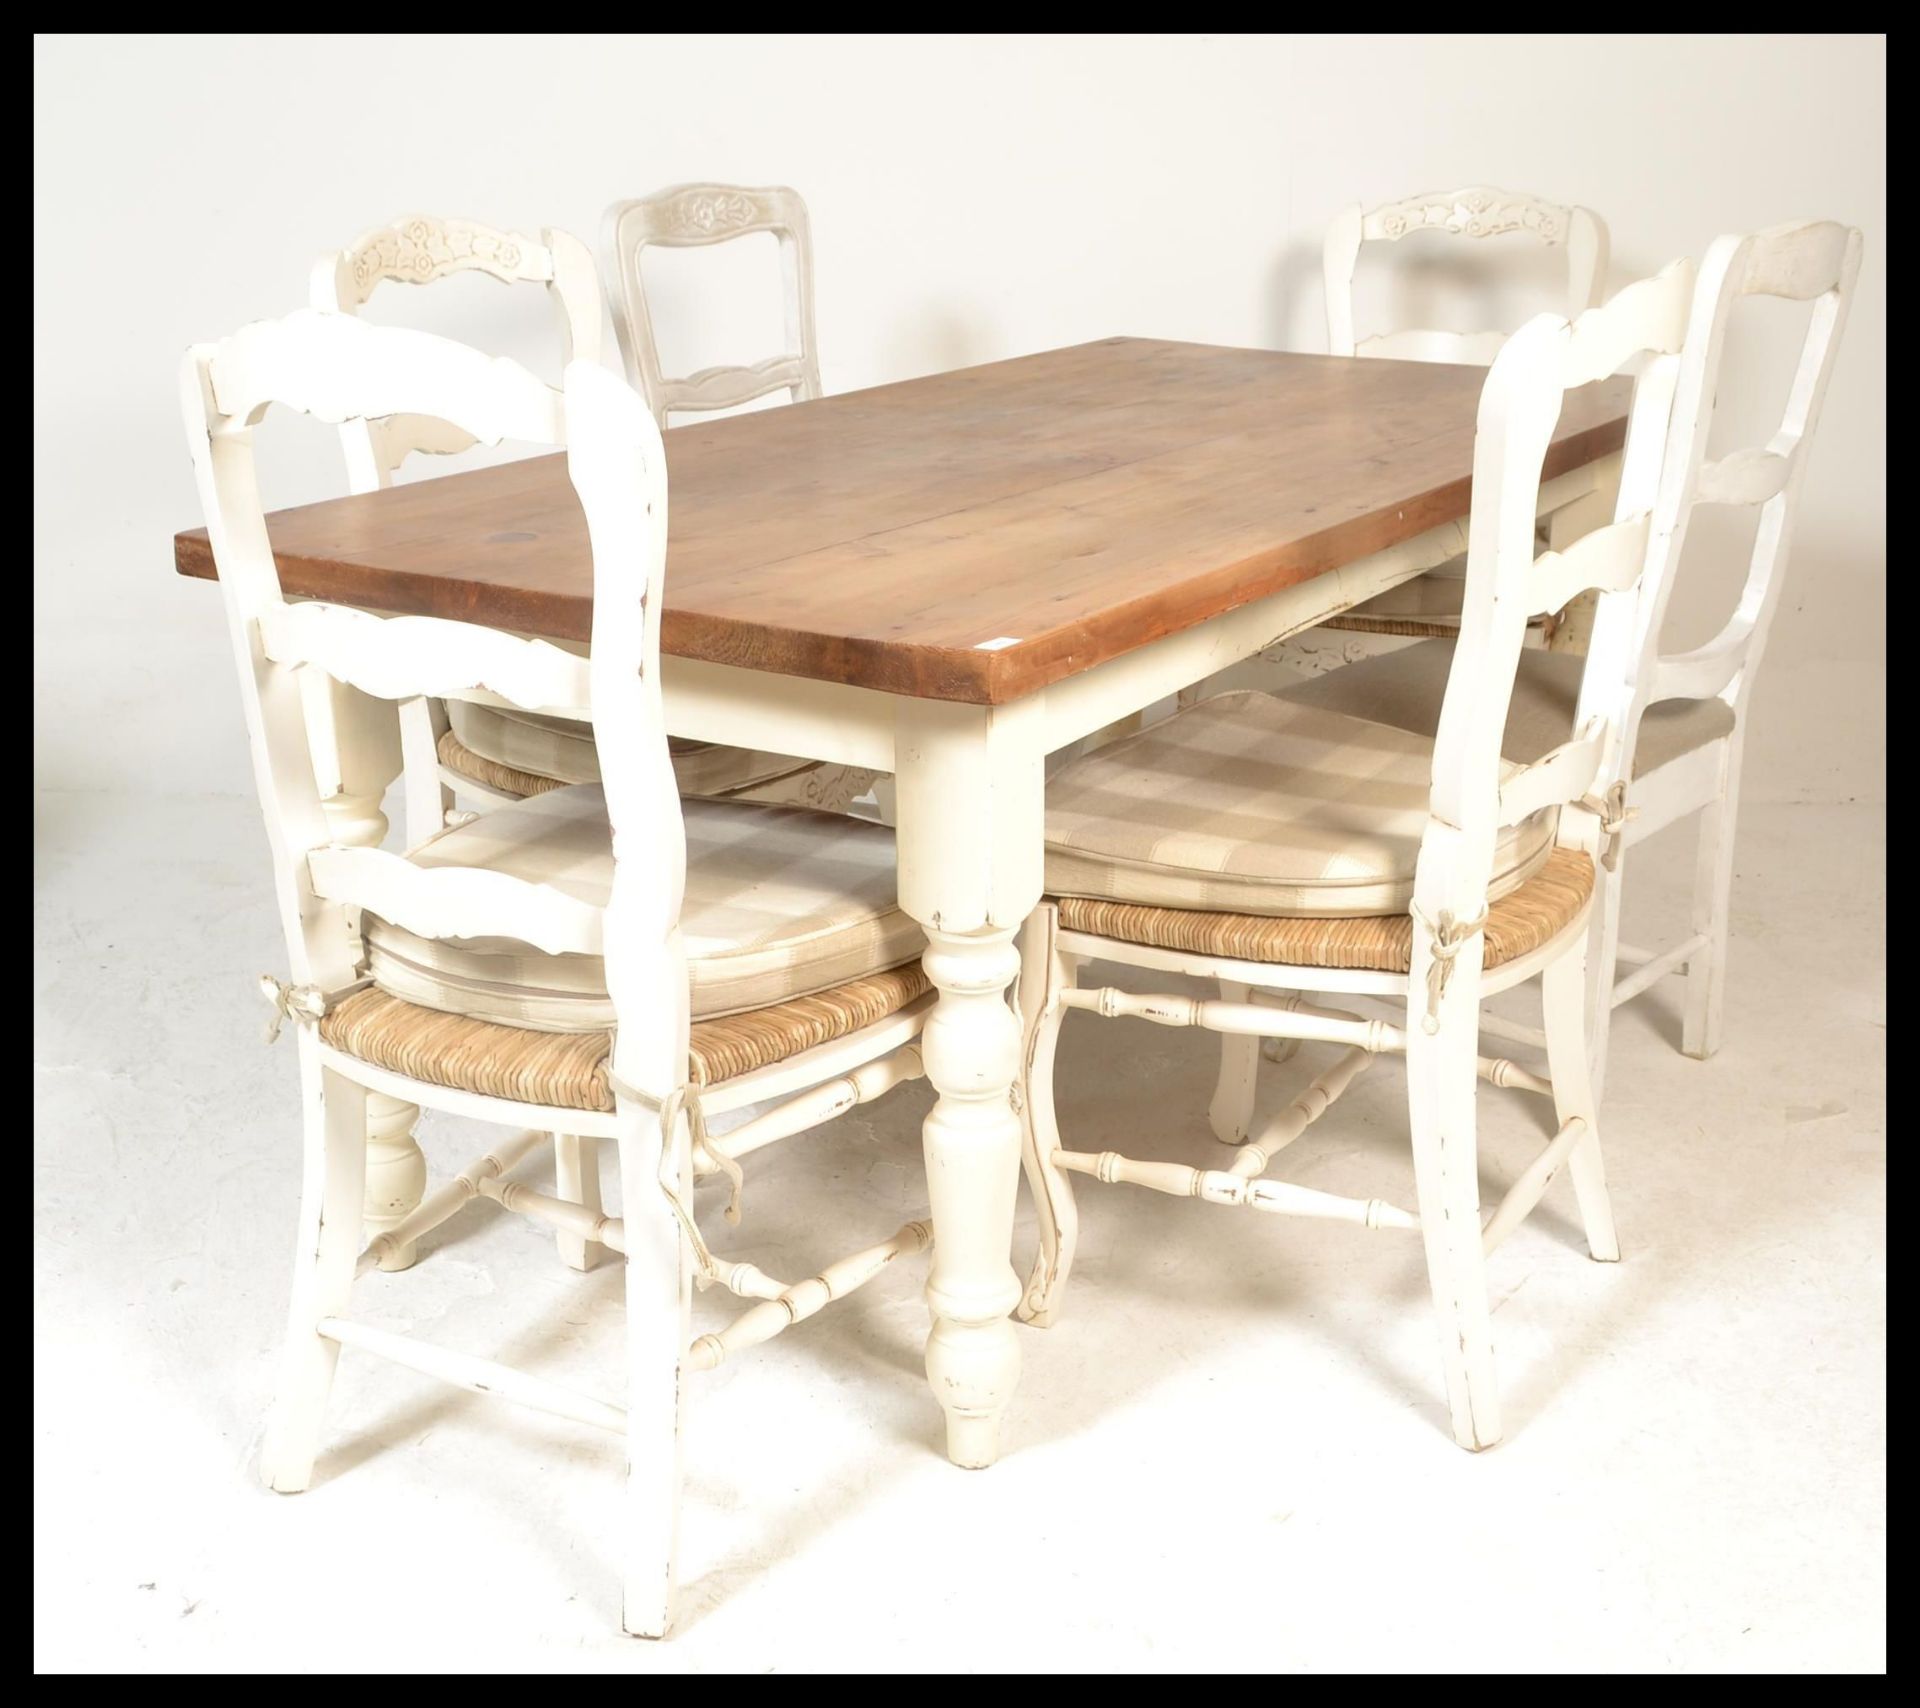 A 20th Century painted pine scrub topped farmhouse refectory dining table. Raised on painted